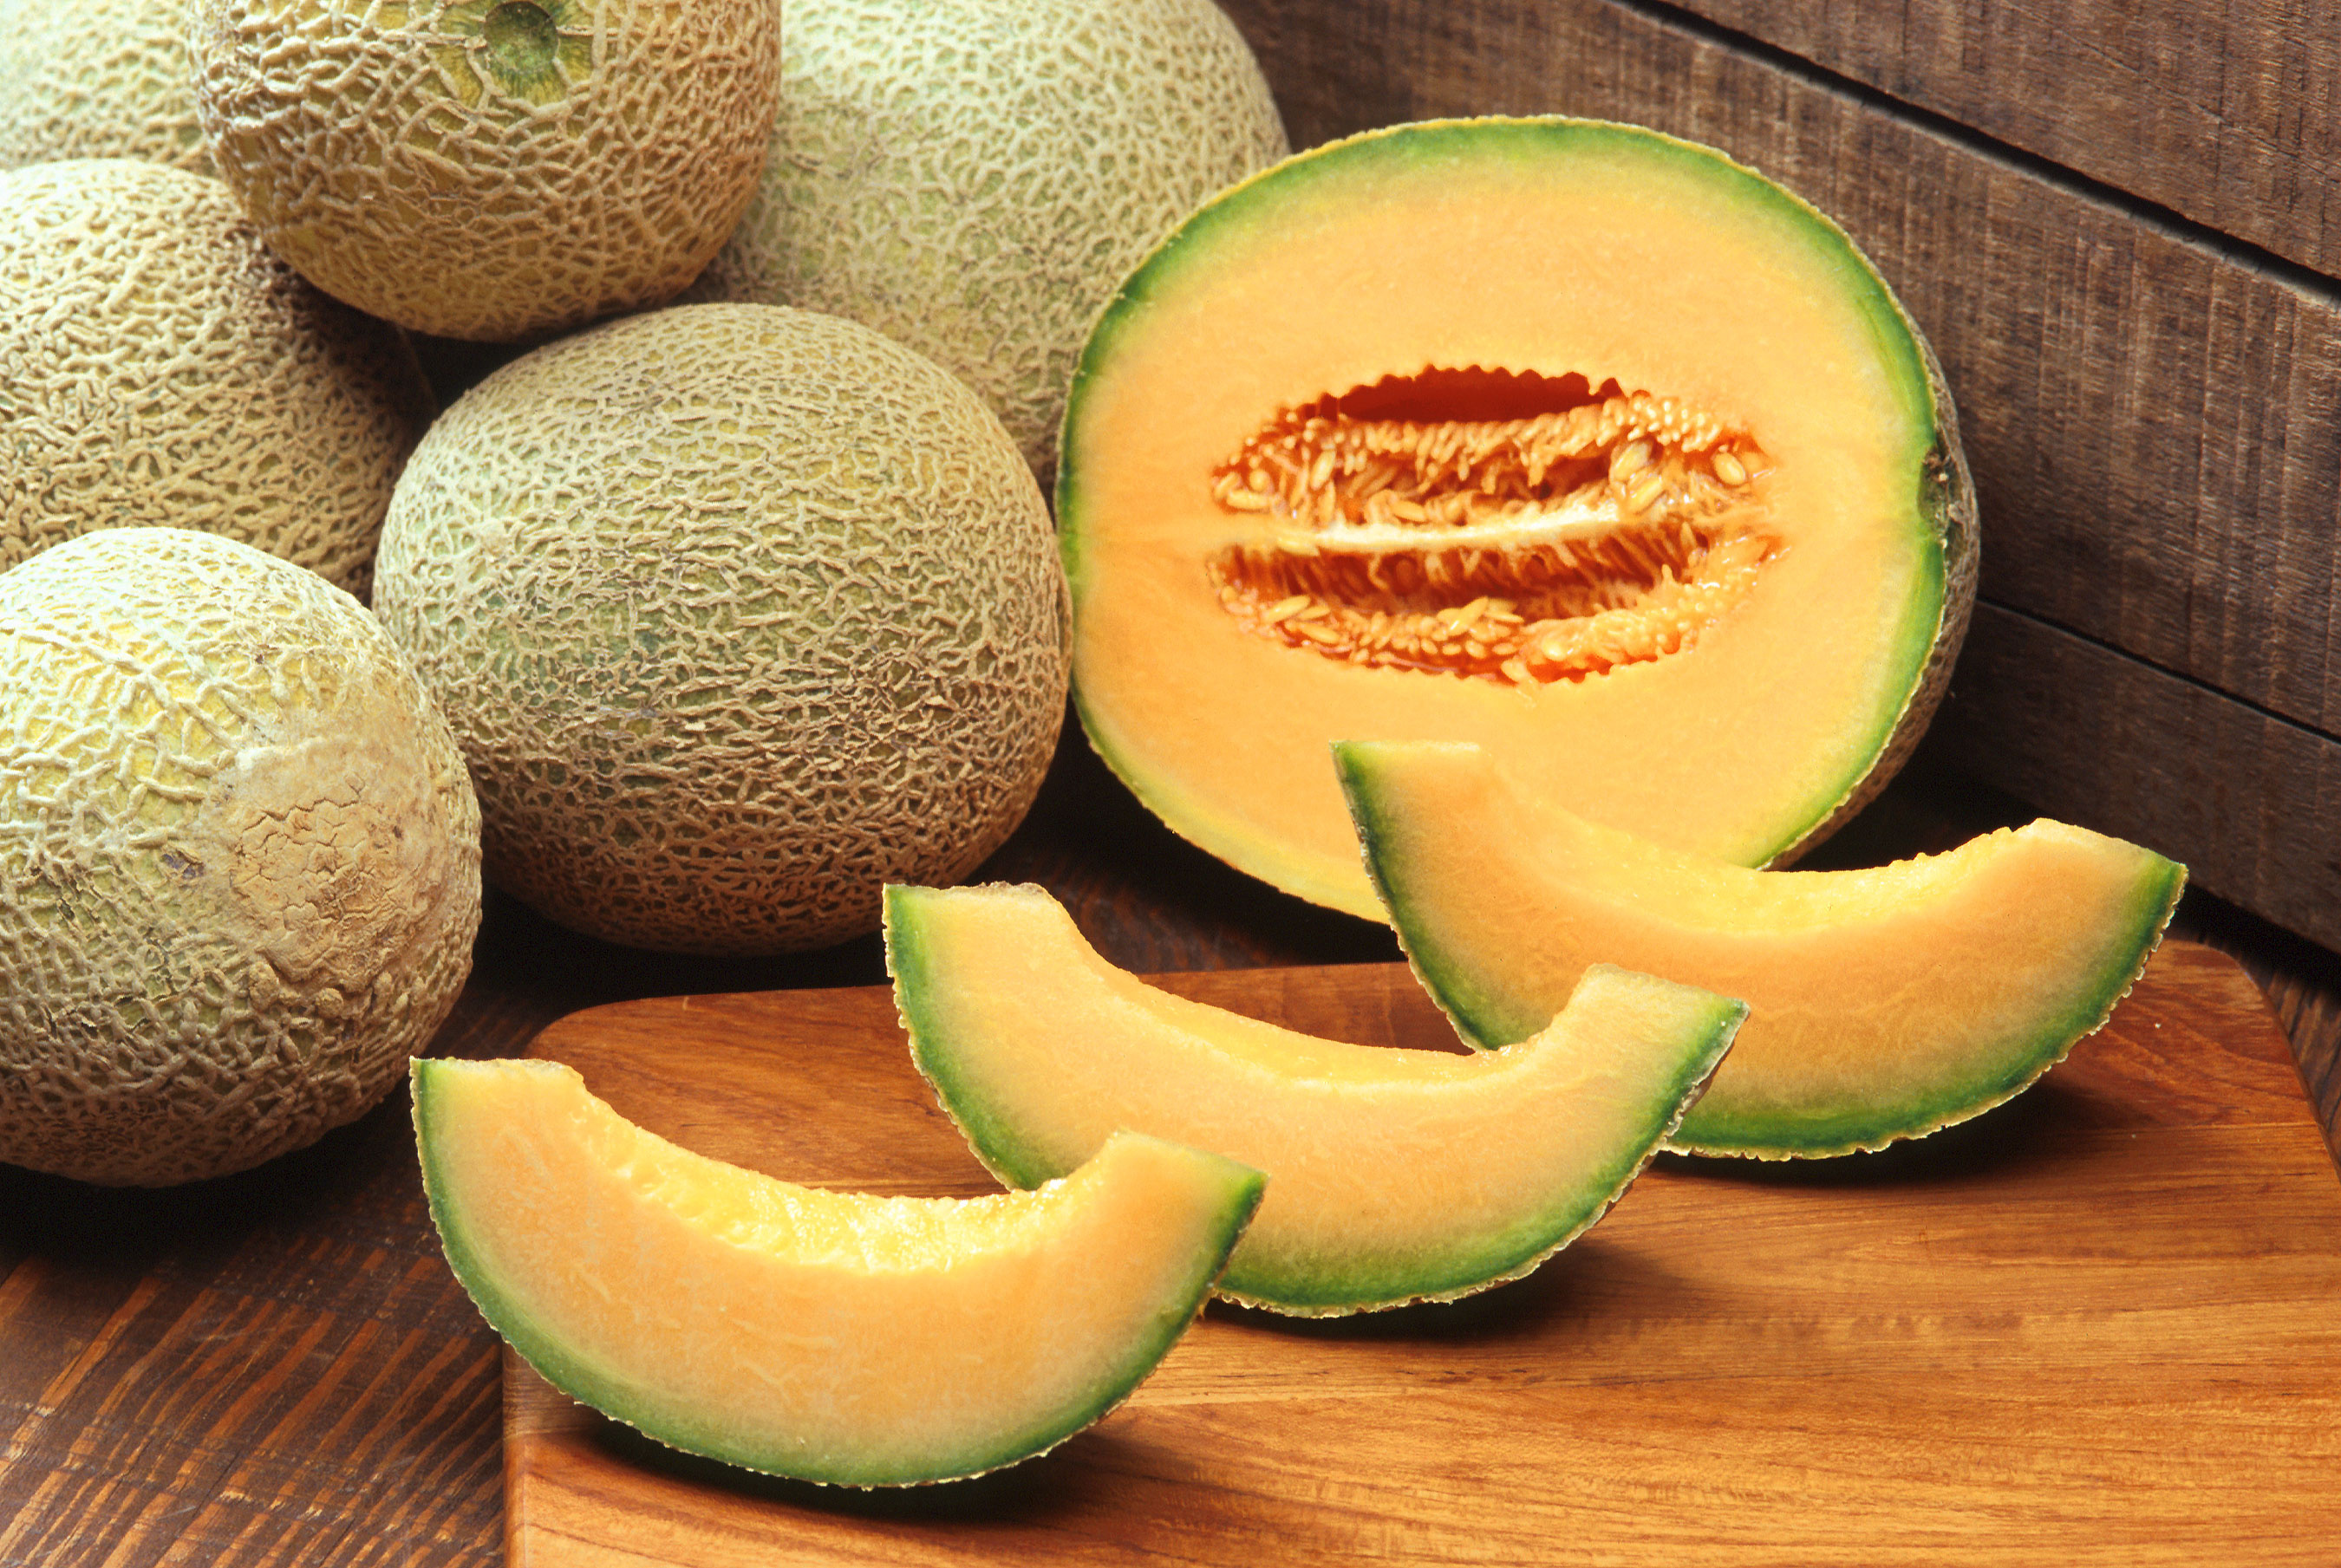 Melon: Cantaloupe, A variety of the muskmelon species. 2700x1810 HD Wallpaper.